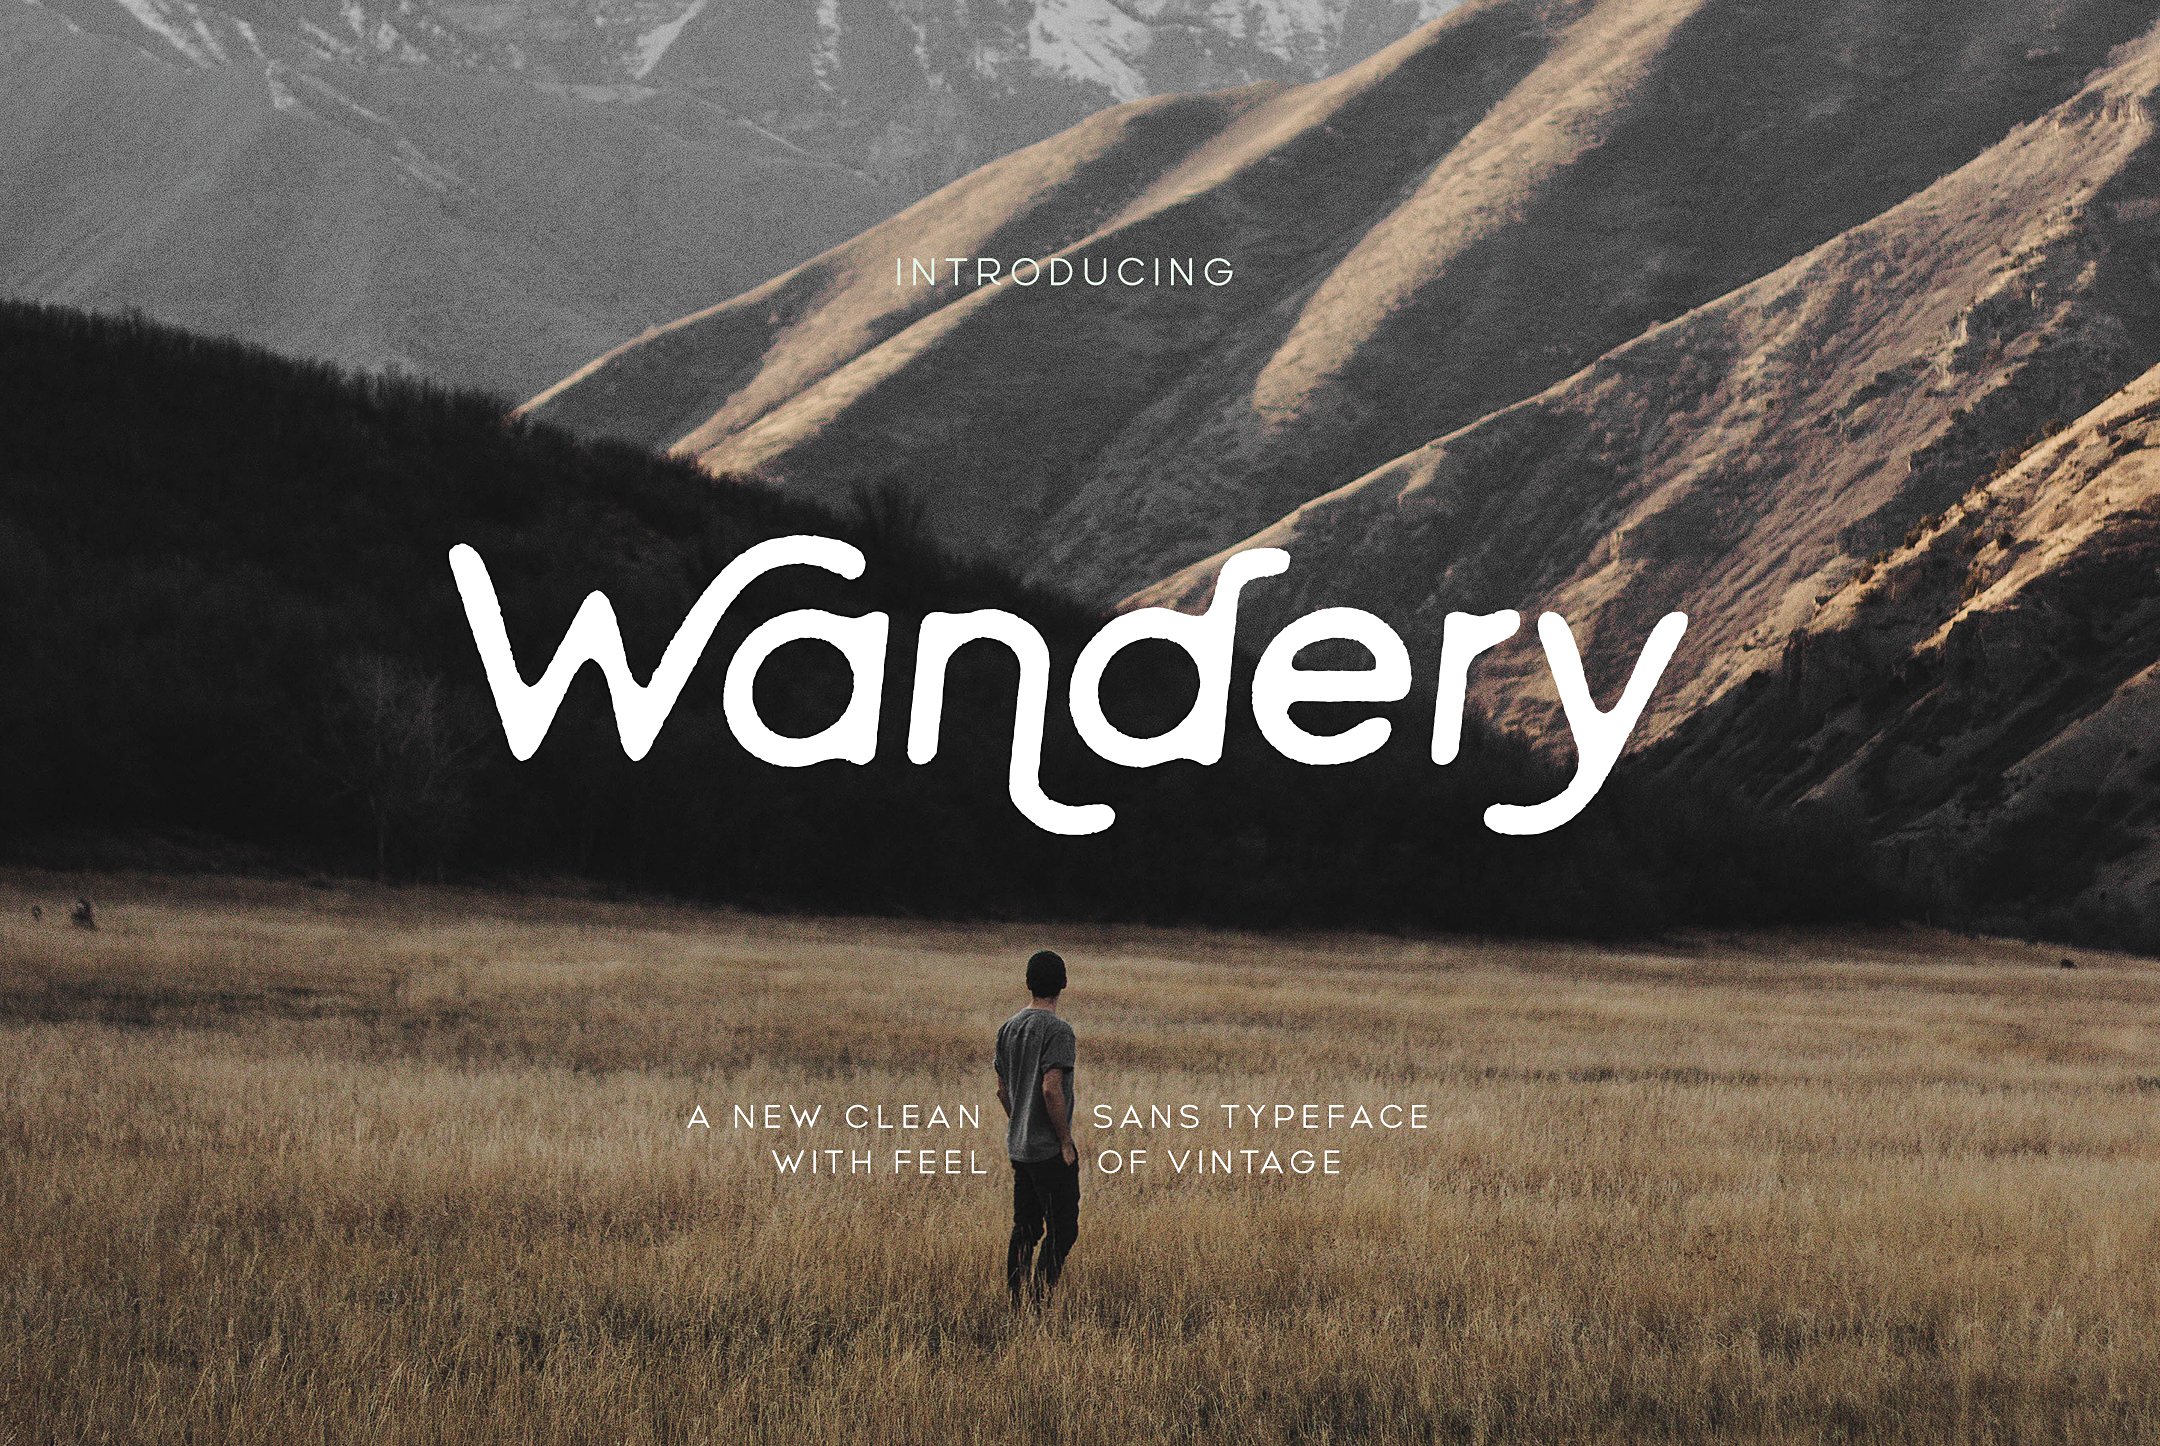 Wandery Modern x Vintage Typeface cover image.